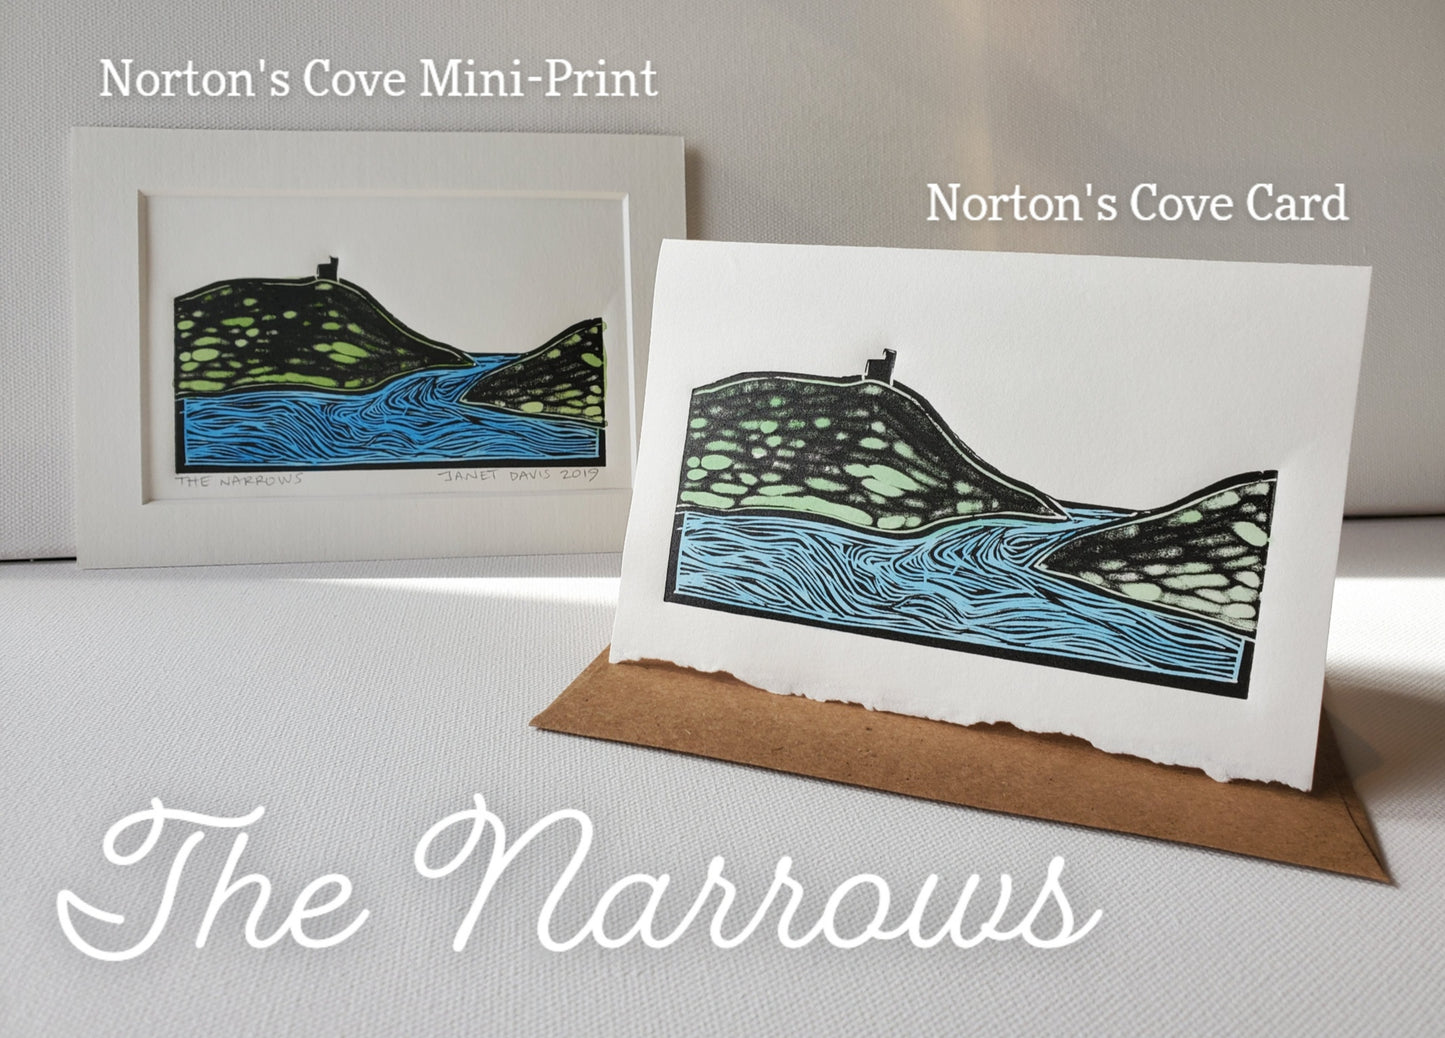 Norton's Cove Mini-print is matted to fit an 8 x 10" frame, and the Norton's Cove Card opens to a blank space for your personal message and comes complete with a Kraft envelope.